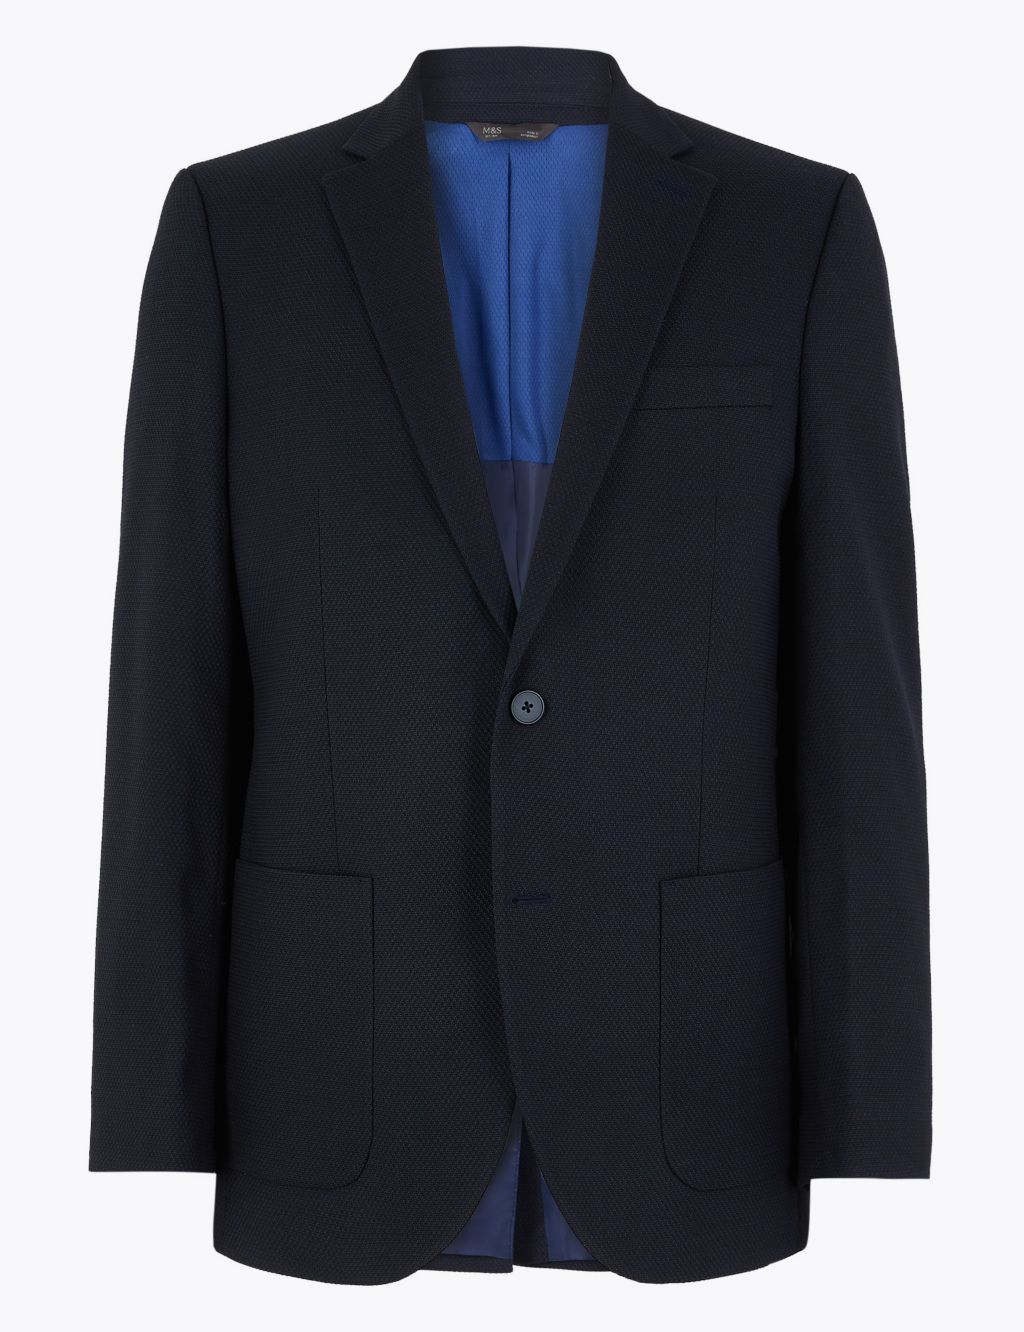 Navy Regular Fit Textured Jacket | M&S Collection | M&S